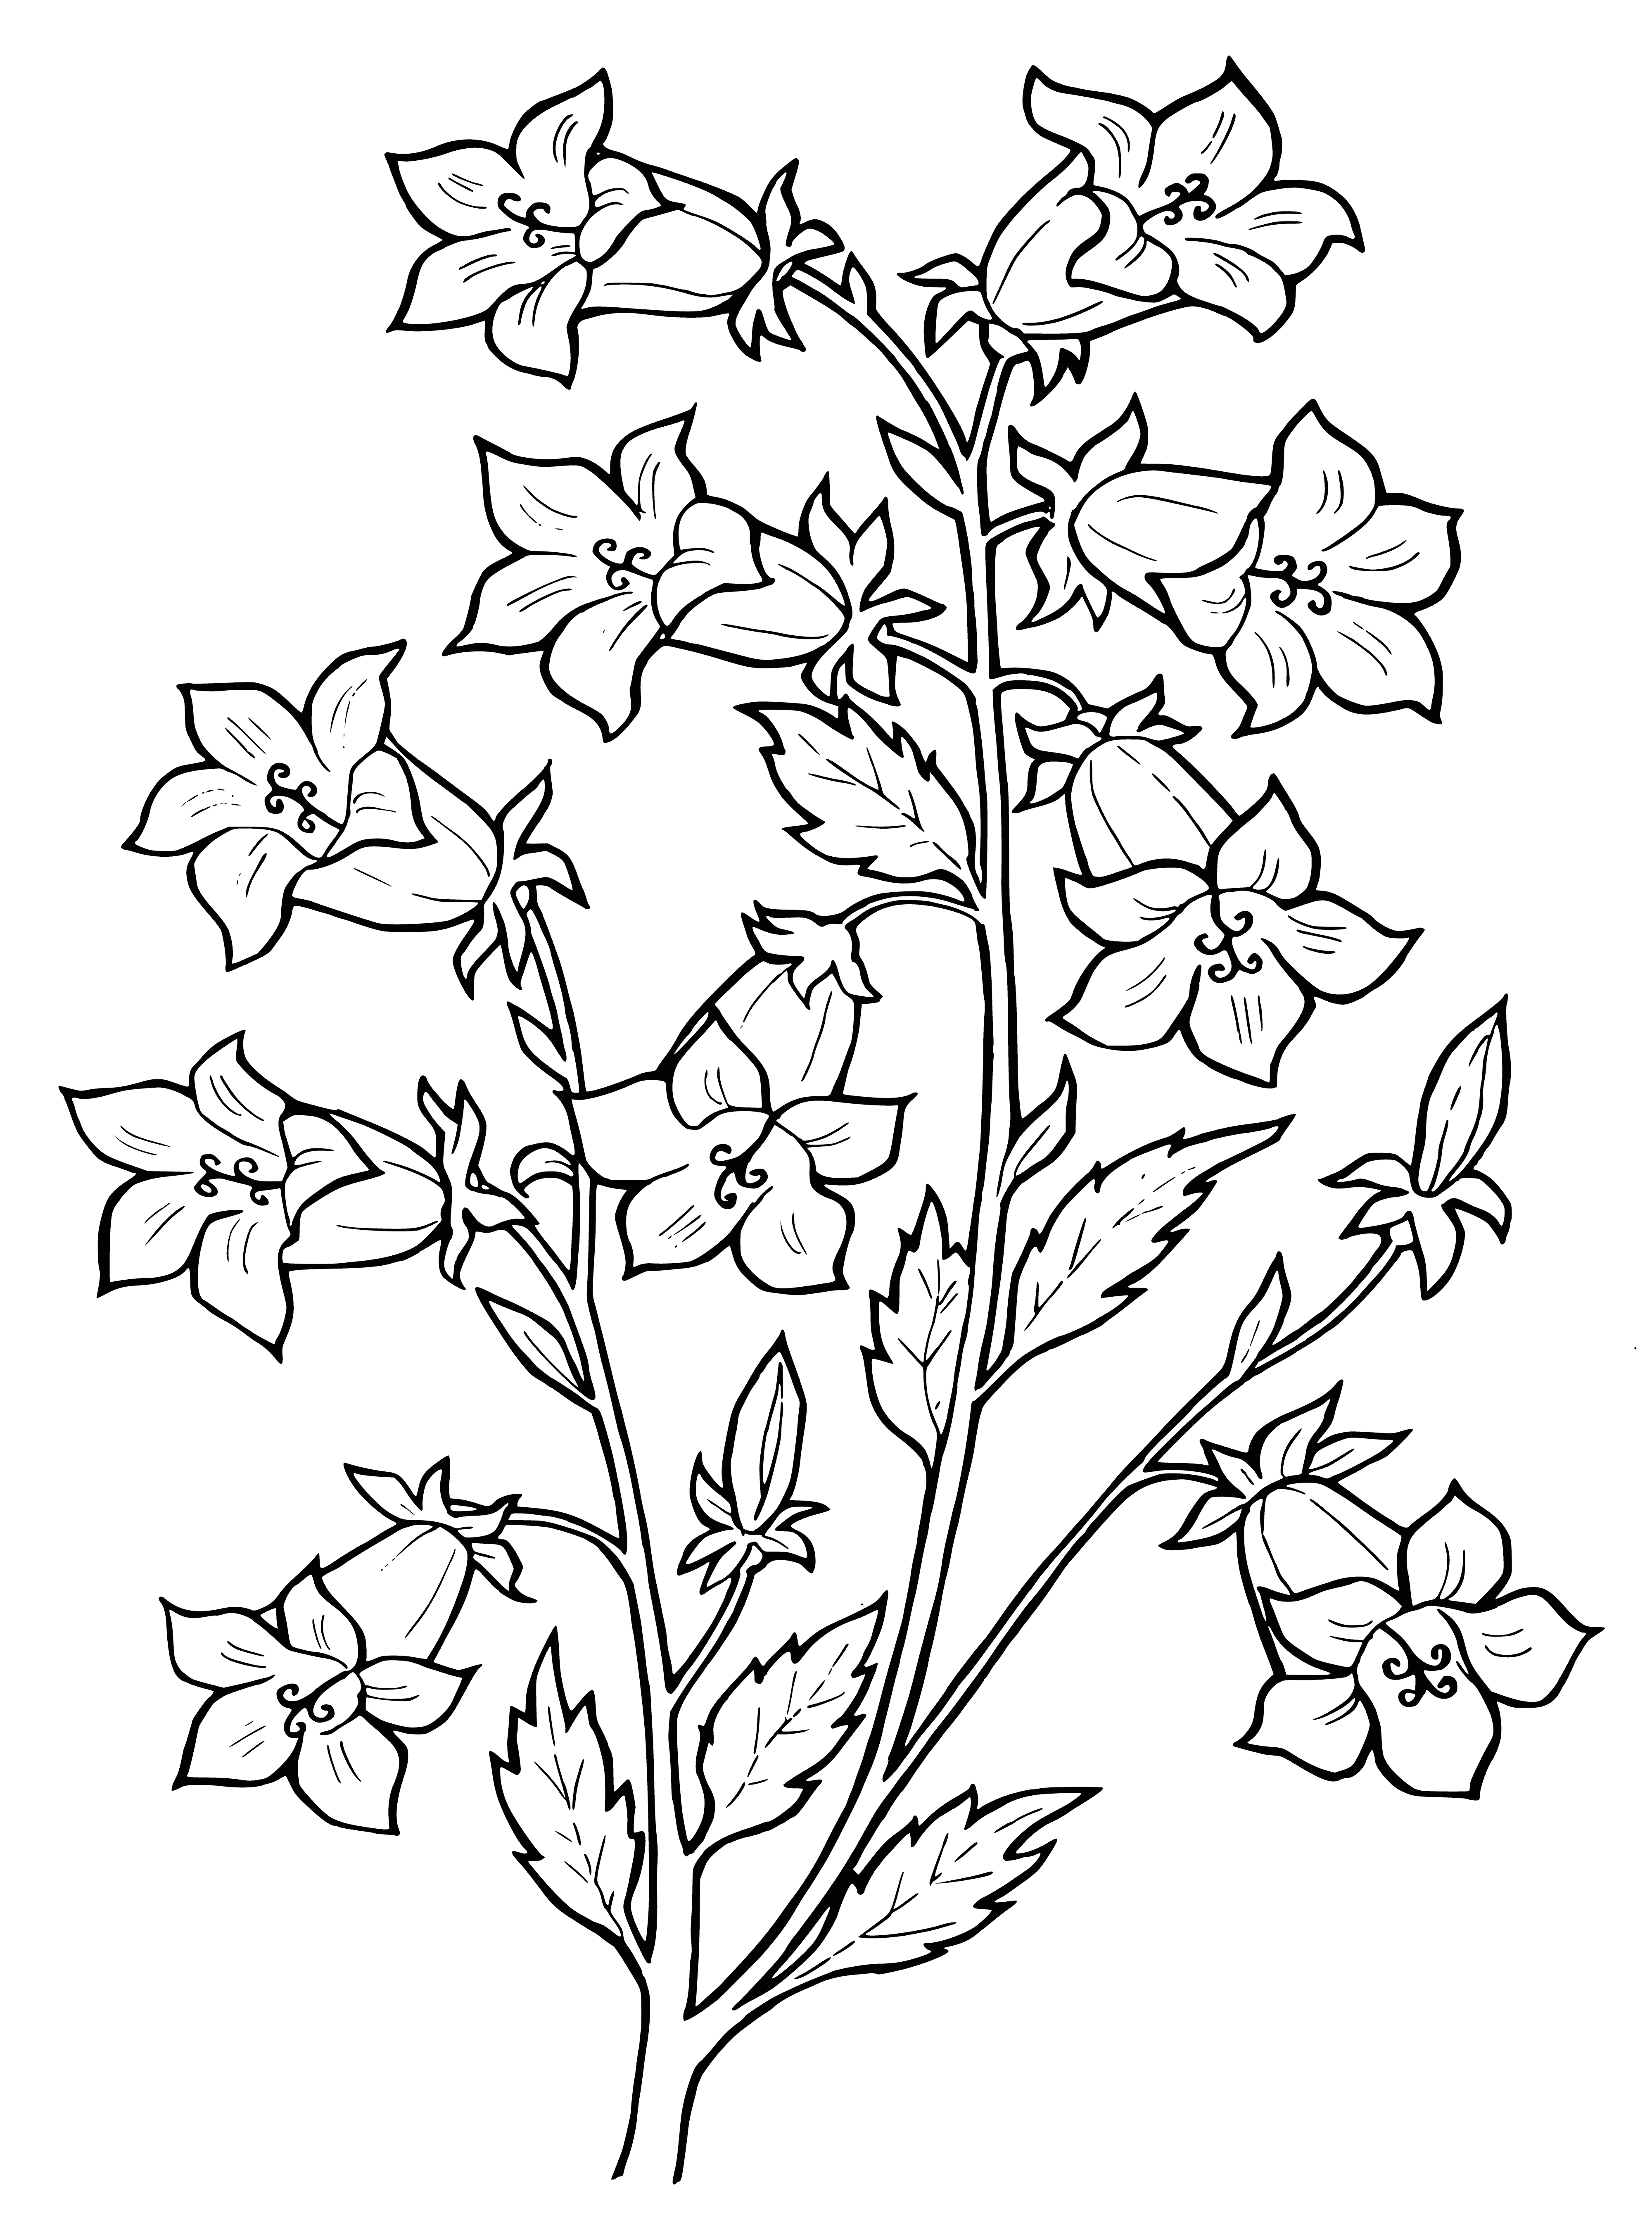 coloring page: Delicate bell flower symbolizes beauty & elegance, w/ white petals & green stem.